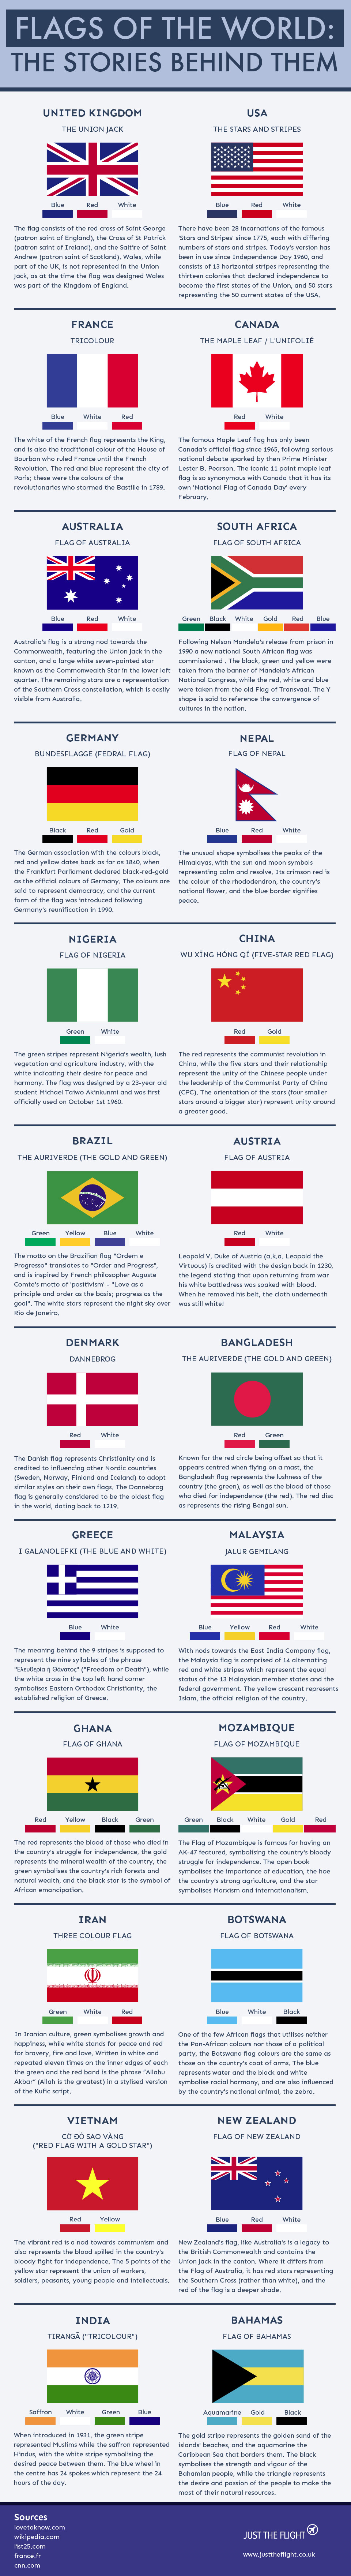 flags of the world infographic